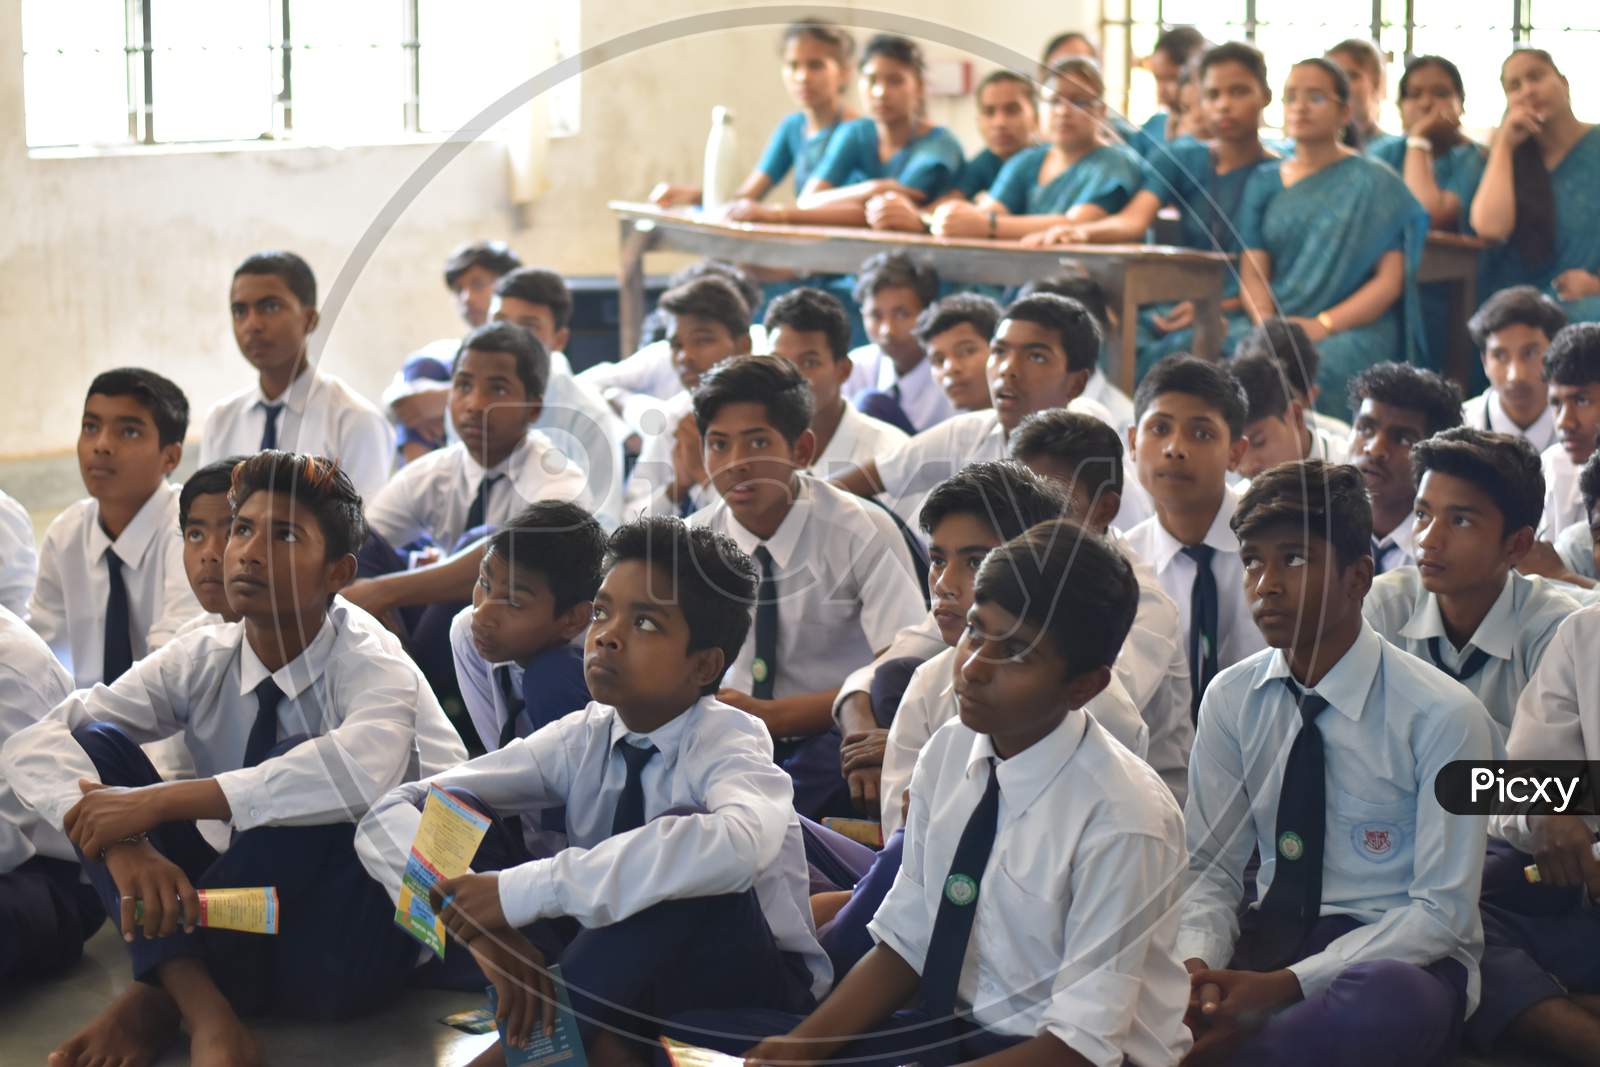 Group of unidentified Indian students of government school inside the class  and enjoying class activity